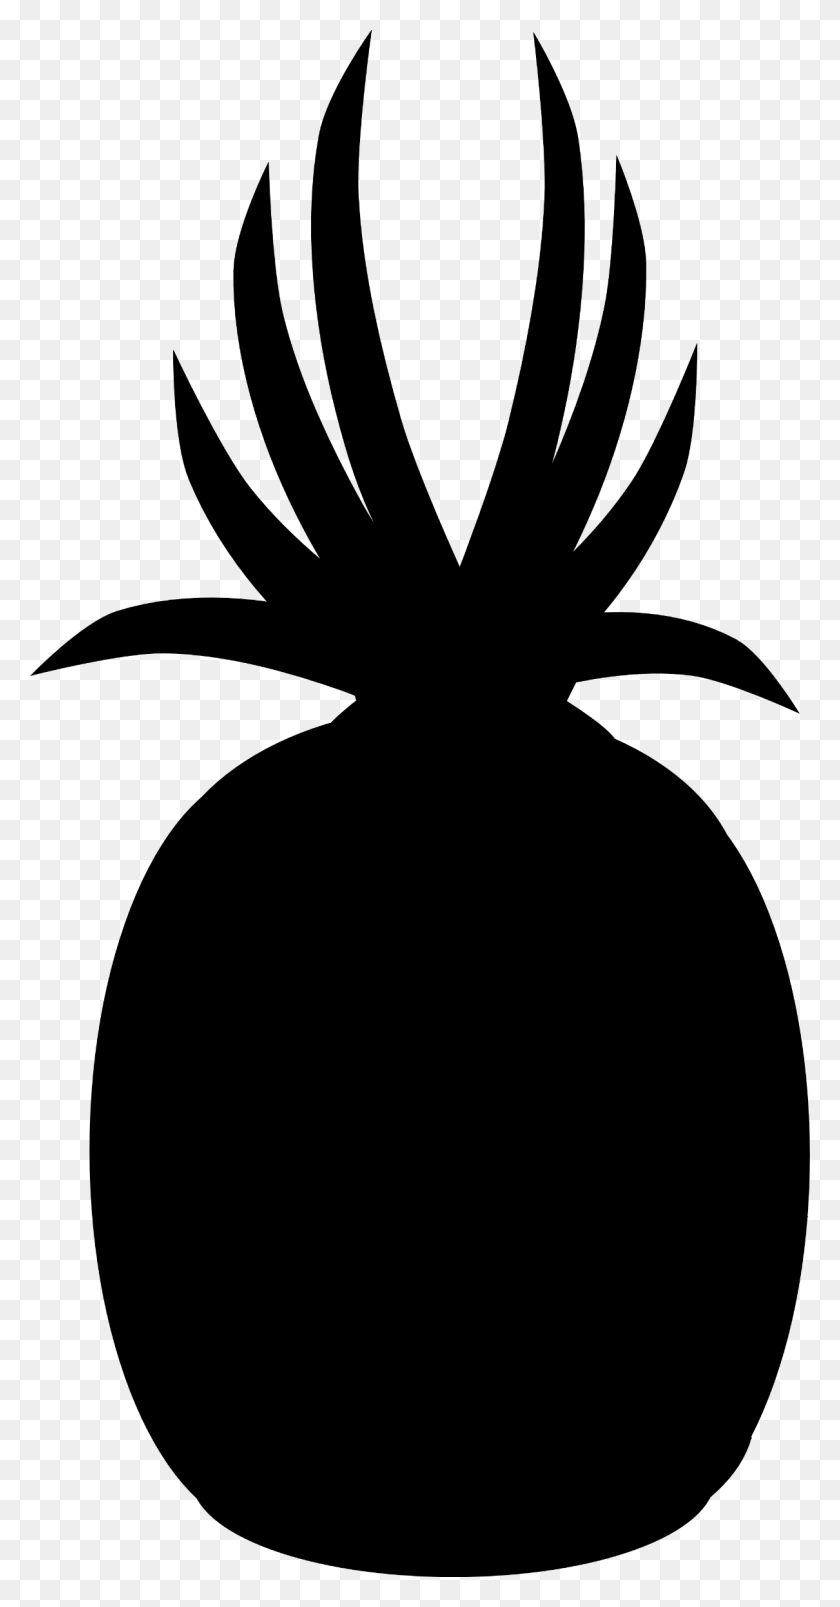 1210x2400 Pineapple Silhouette - Pineapple Clipart Free